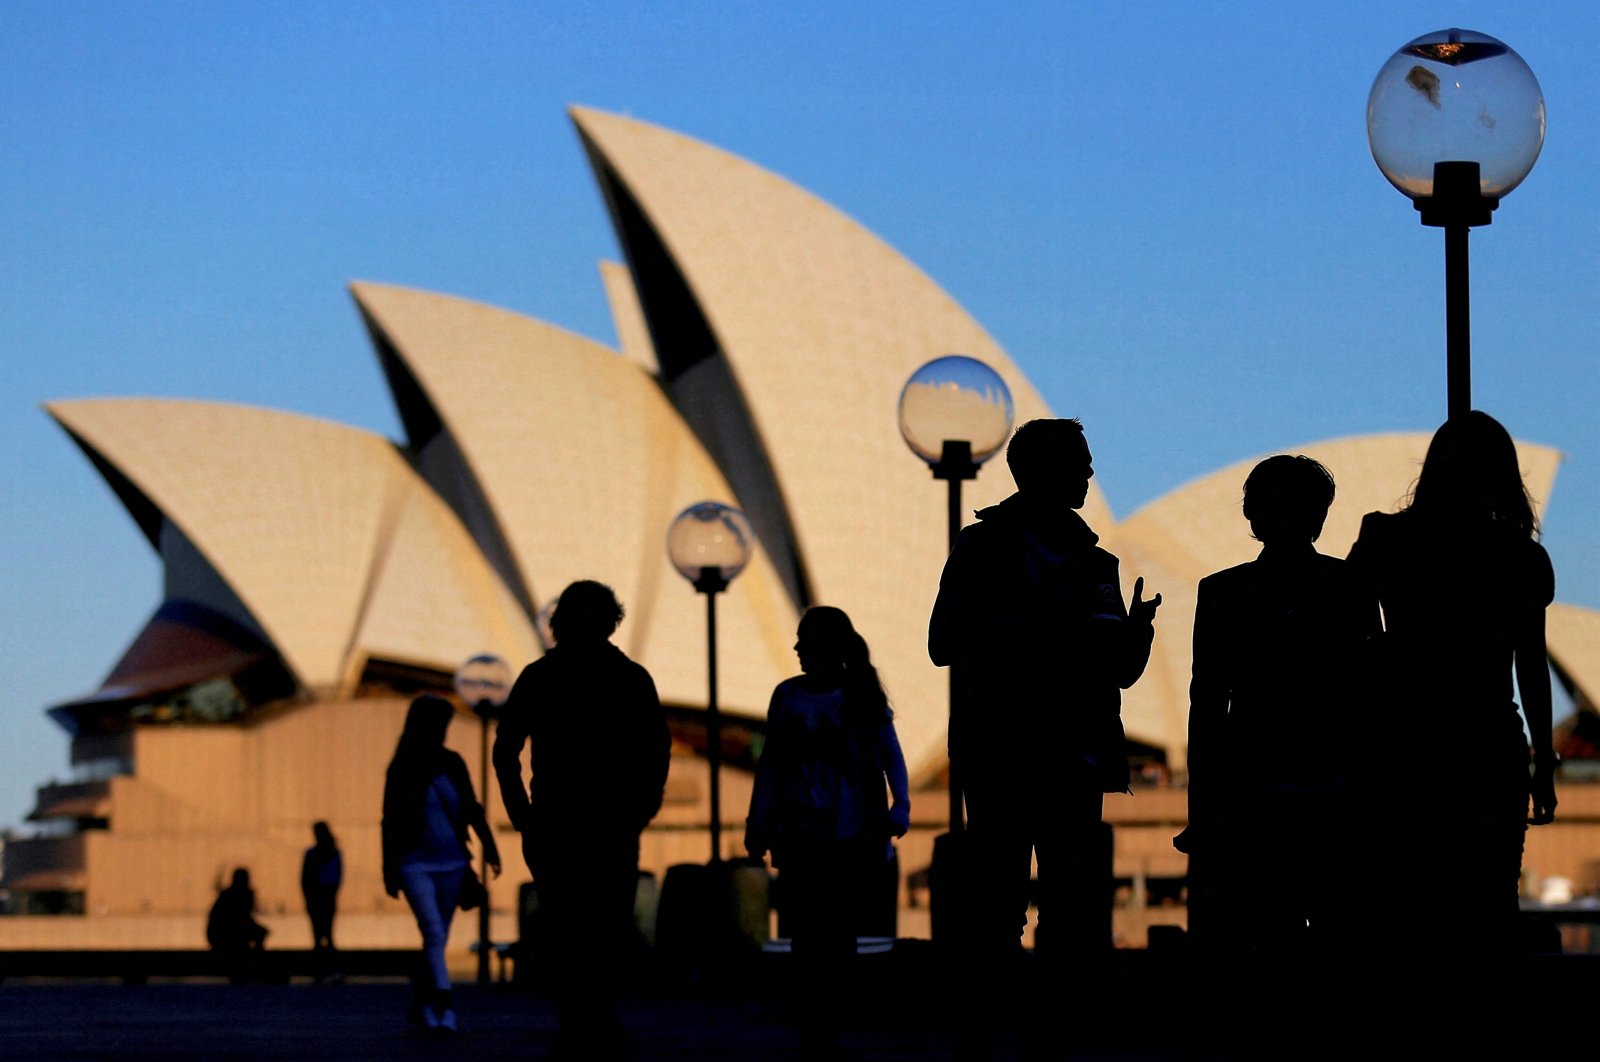 People are silhouetted against the Sydney Opera House at sunset, Sydney, Australia, Nov. 2, 2016. (Reuters Photo)